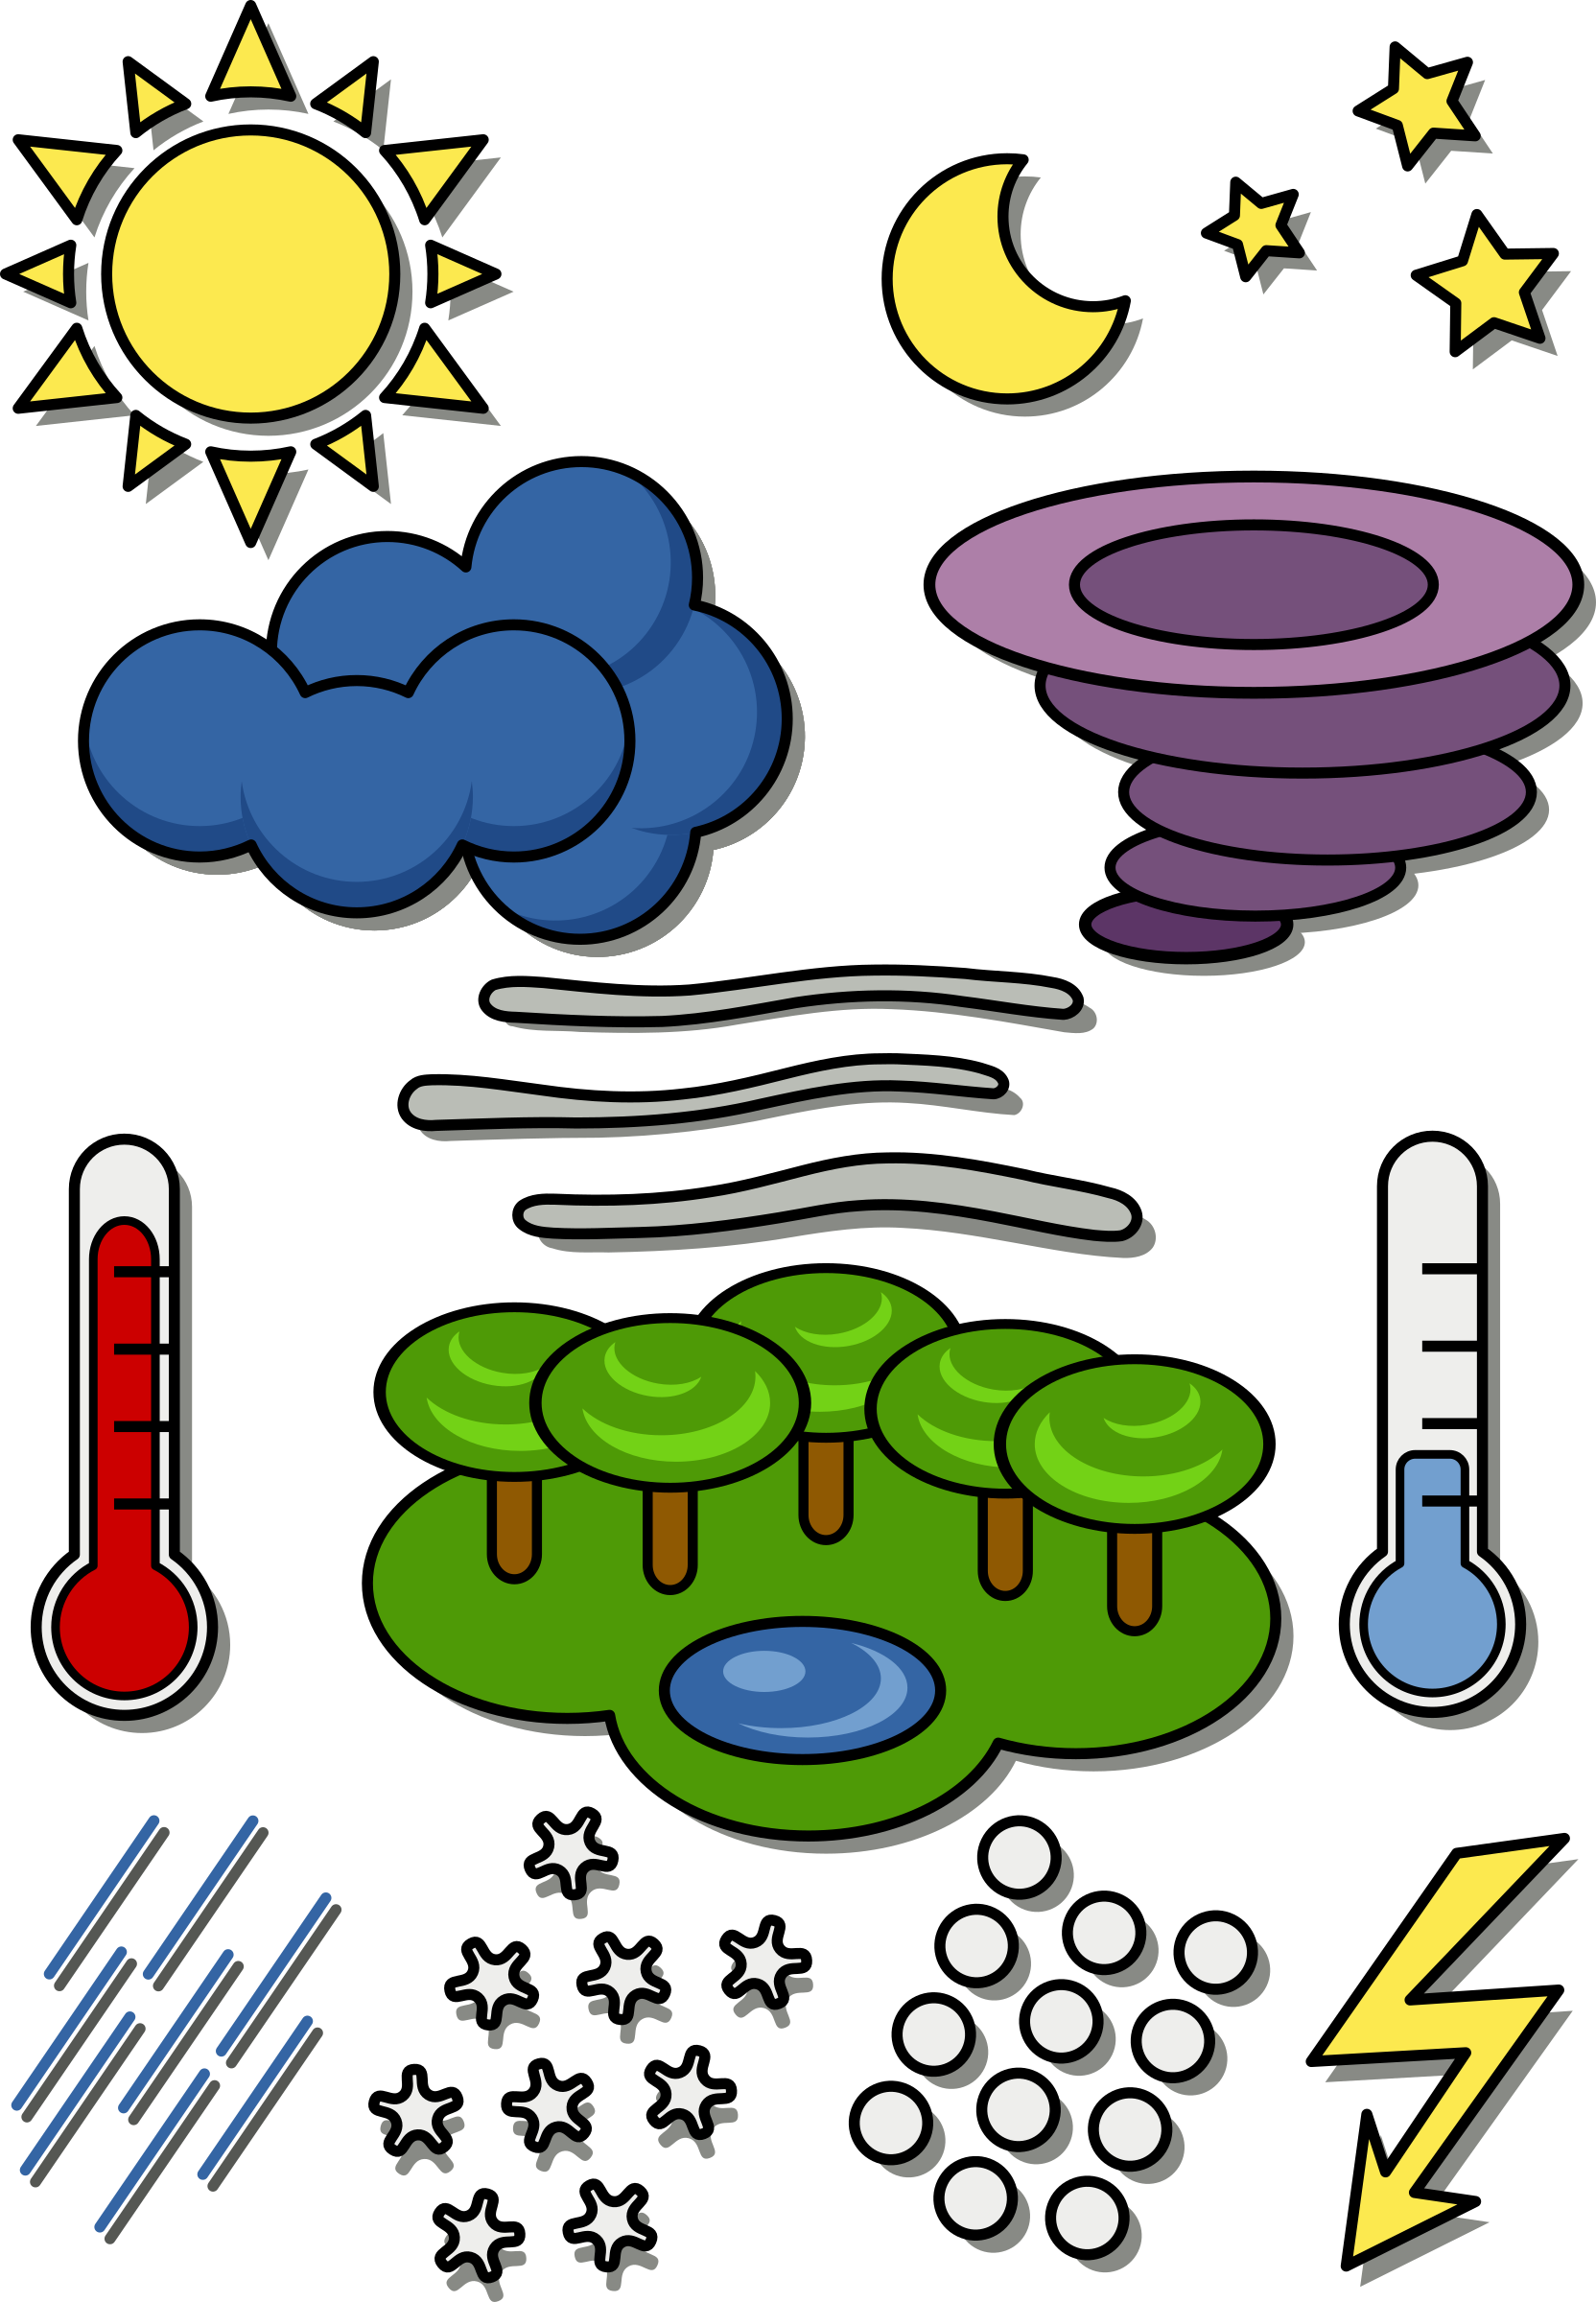 cloudy clipart weather chart